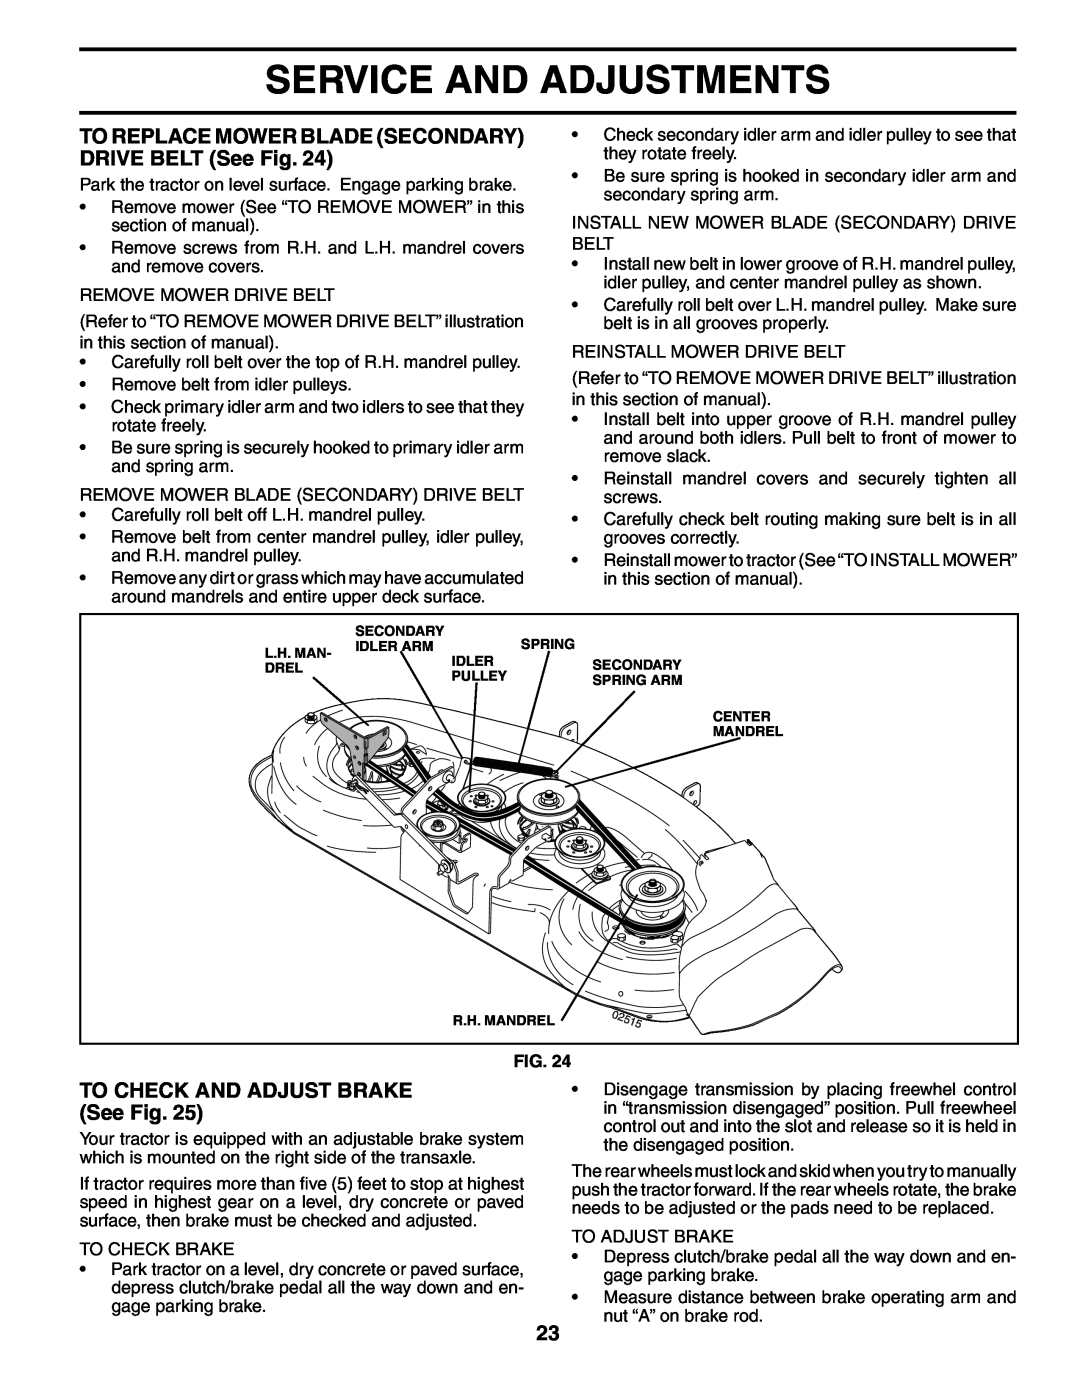 Poulan DB24H48YT manual TO REPLACE MOWER BLADE SECONDARY DRIVE BELT See Fig, TO CHECK AND ADJUST BRAKE See Fig 